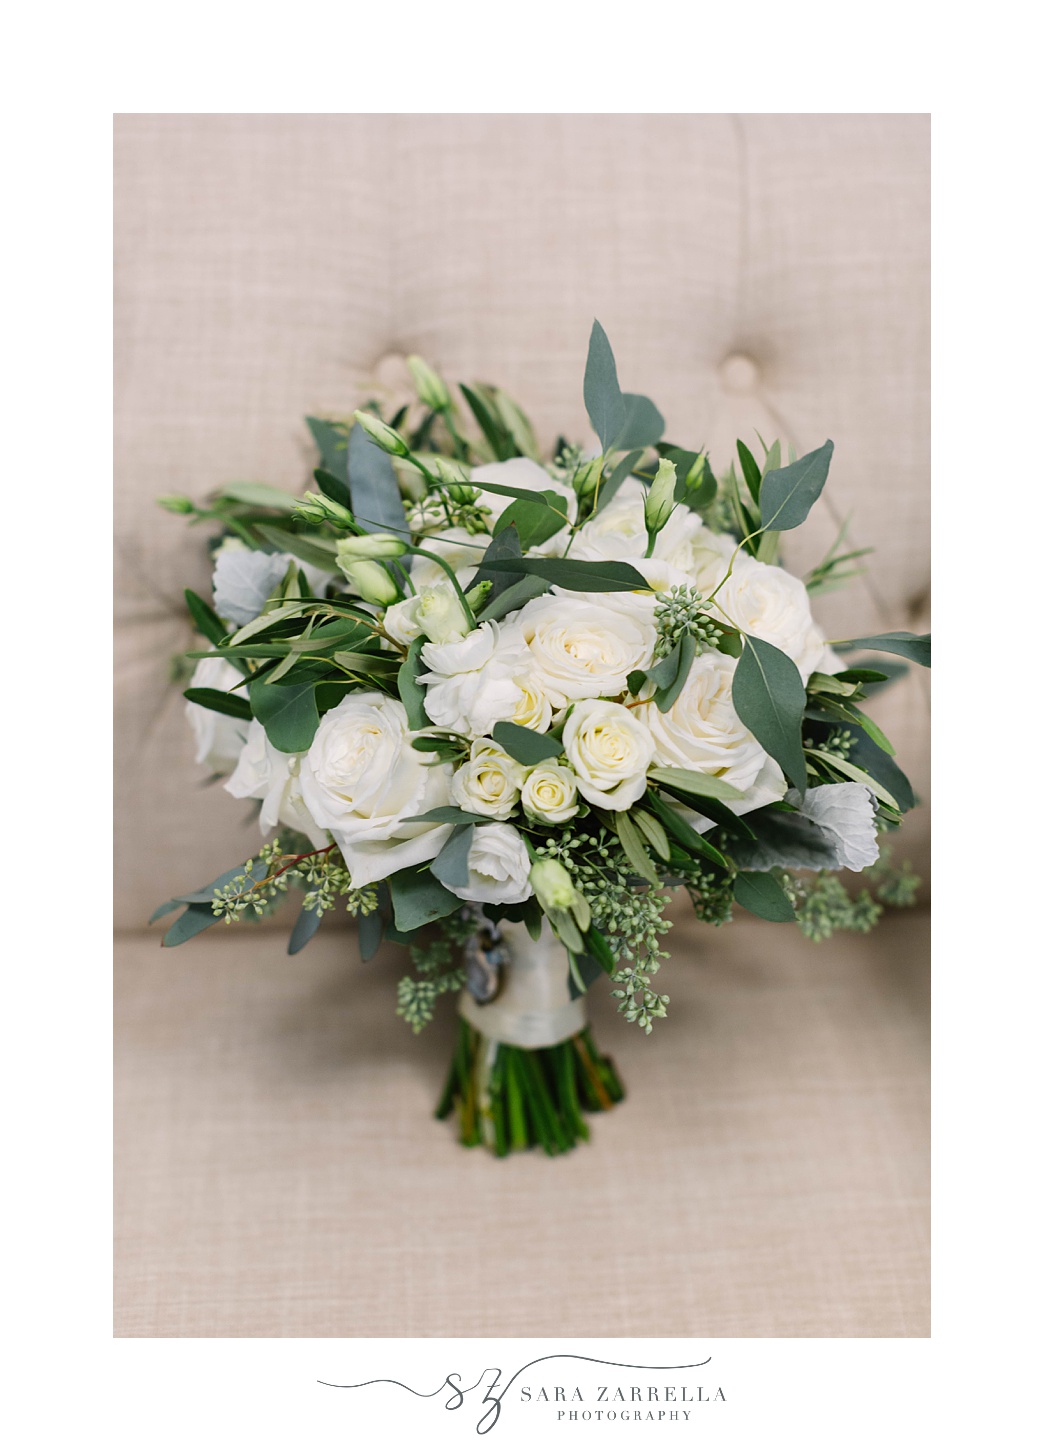 bride's bouquet of white flowers and greenery